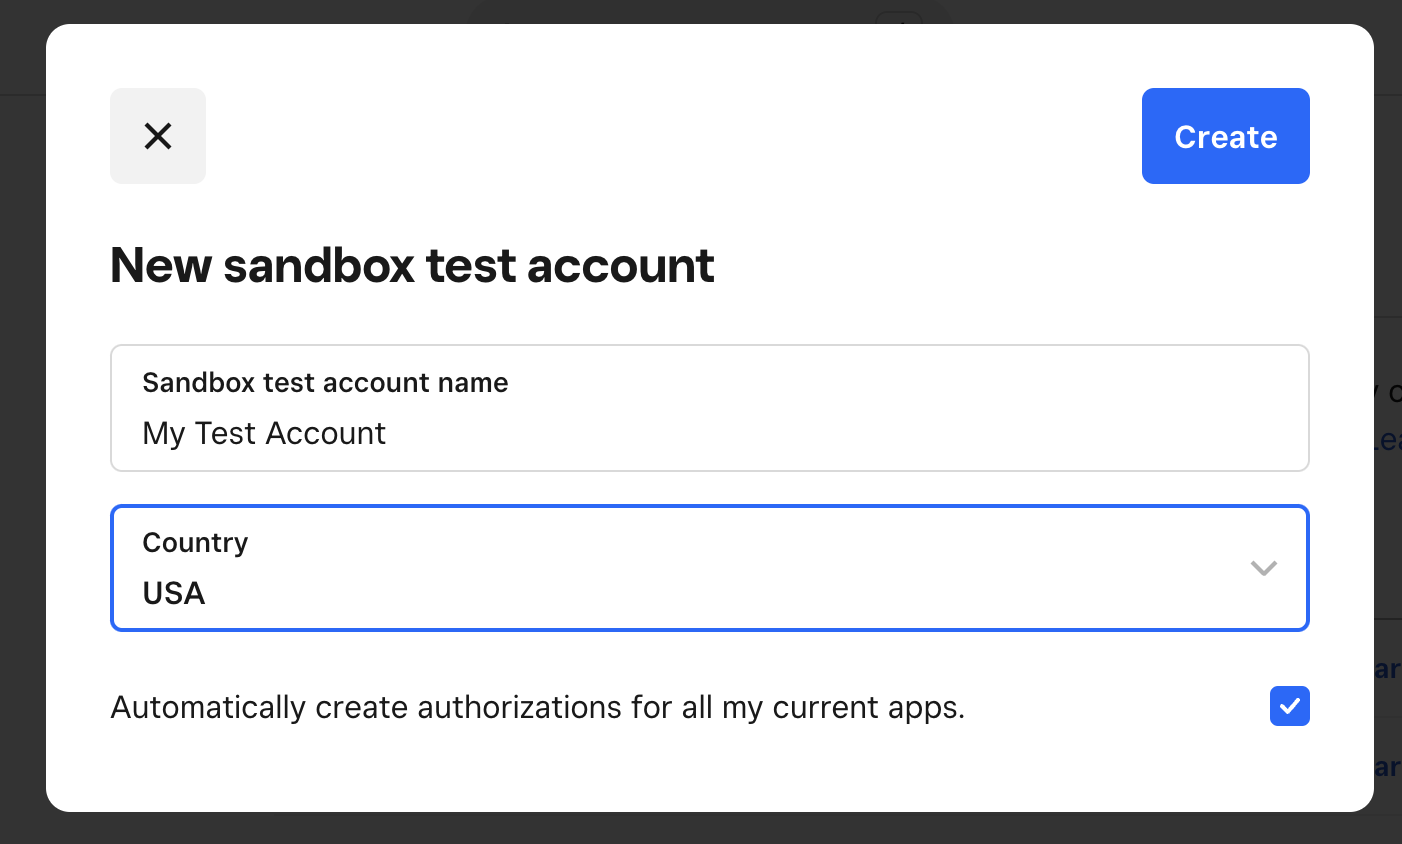 Image showing Sanbox test account settings